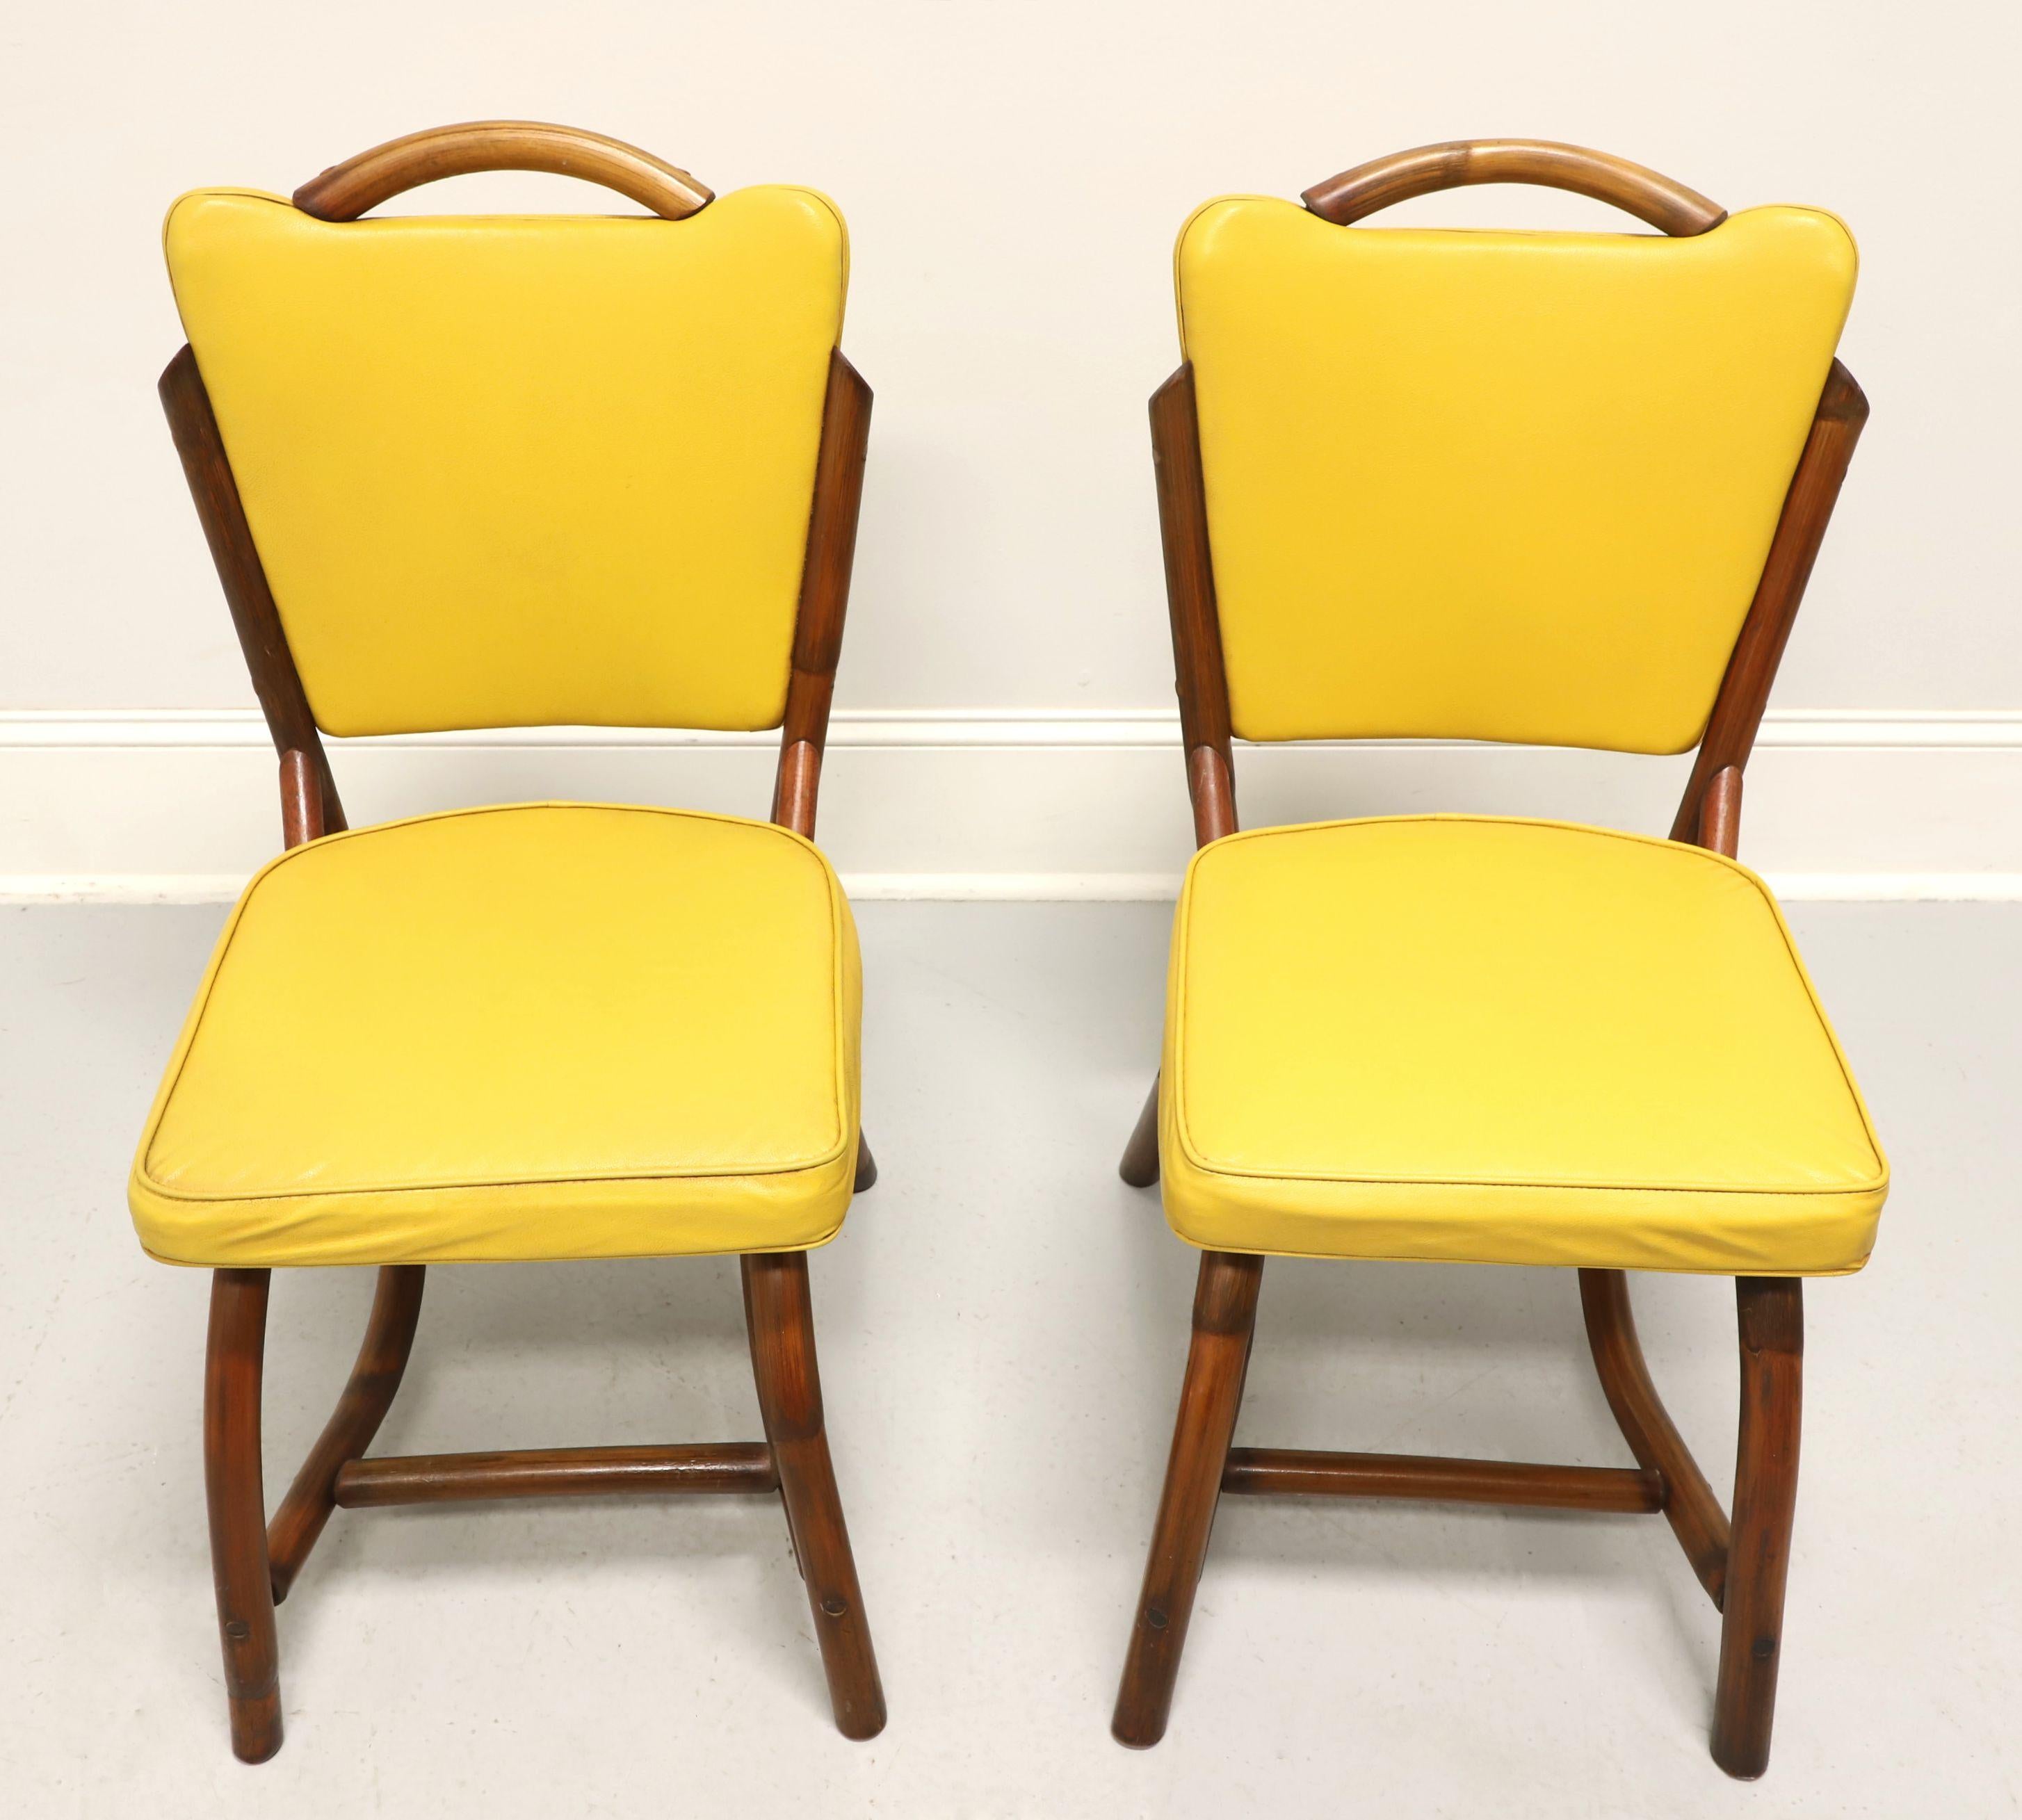 A pair of mid 20th century Coastal style dining side chairs by Bam-Tan Products. Rattan with a distinctive mid century modern style, rounded back with flared corner yellow colored vinyl upholstered backrest, arched legs and stretchers supporting